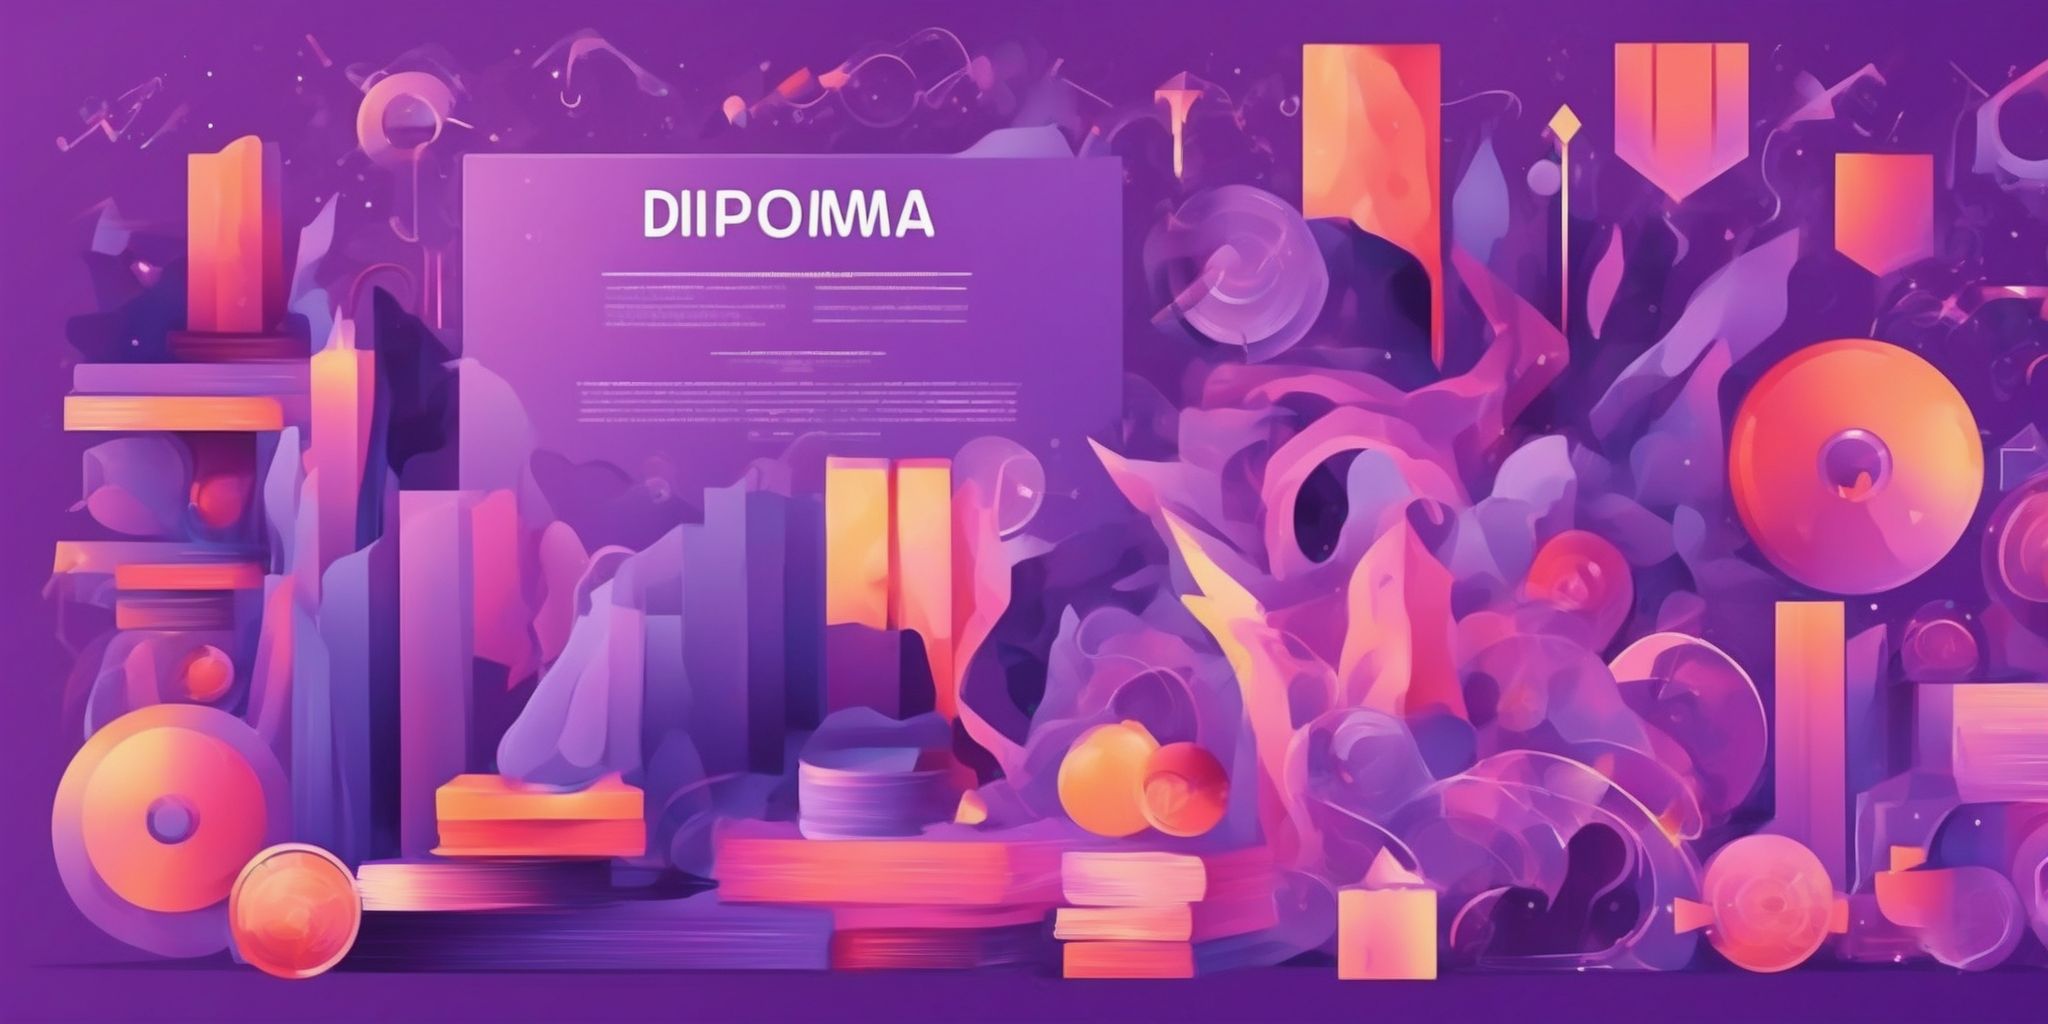 Diploma in flat illustration style, colorful purple gradient colors